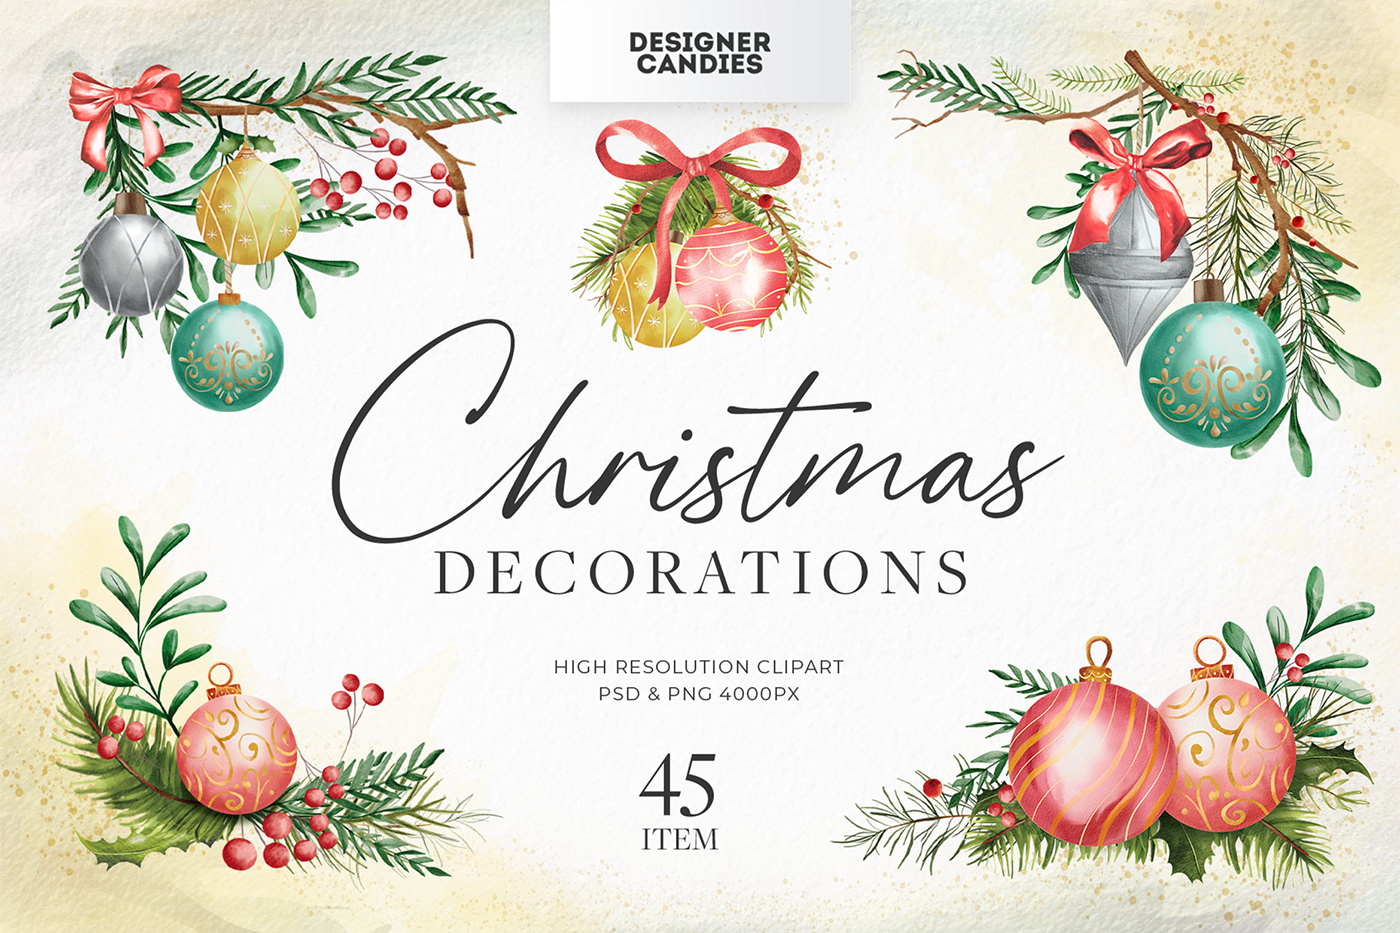 Christmas clipart decoration elements wreath baubles rustic traditional watercolor psd